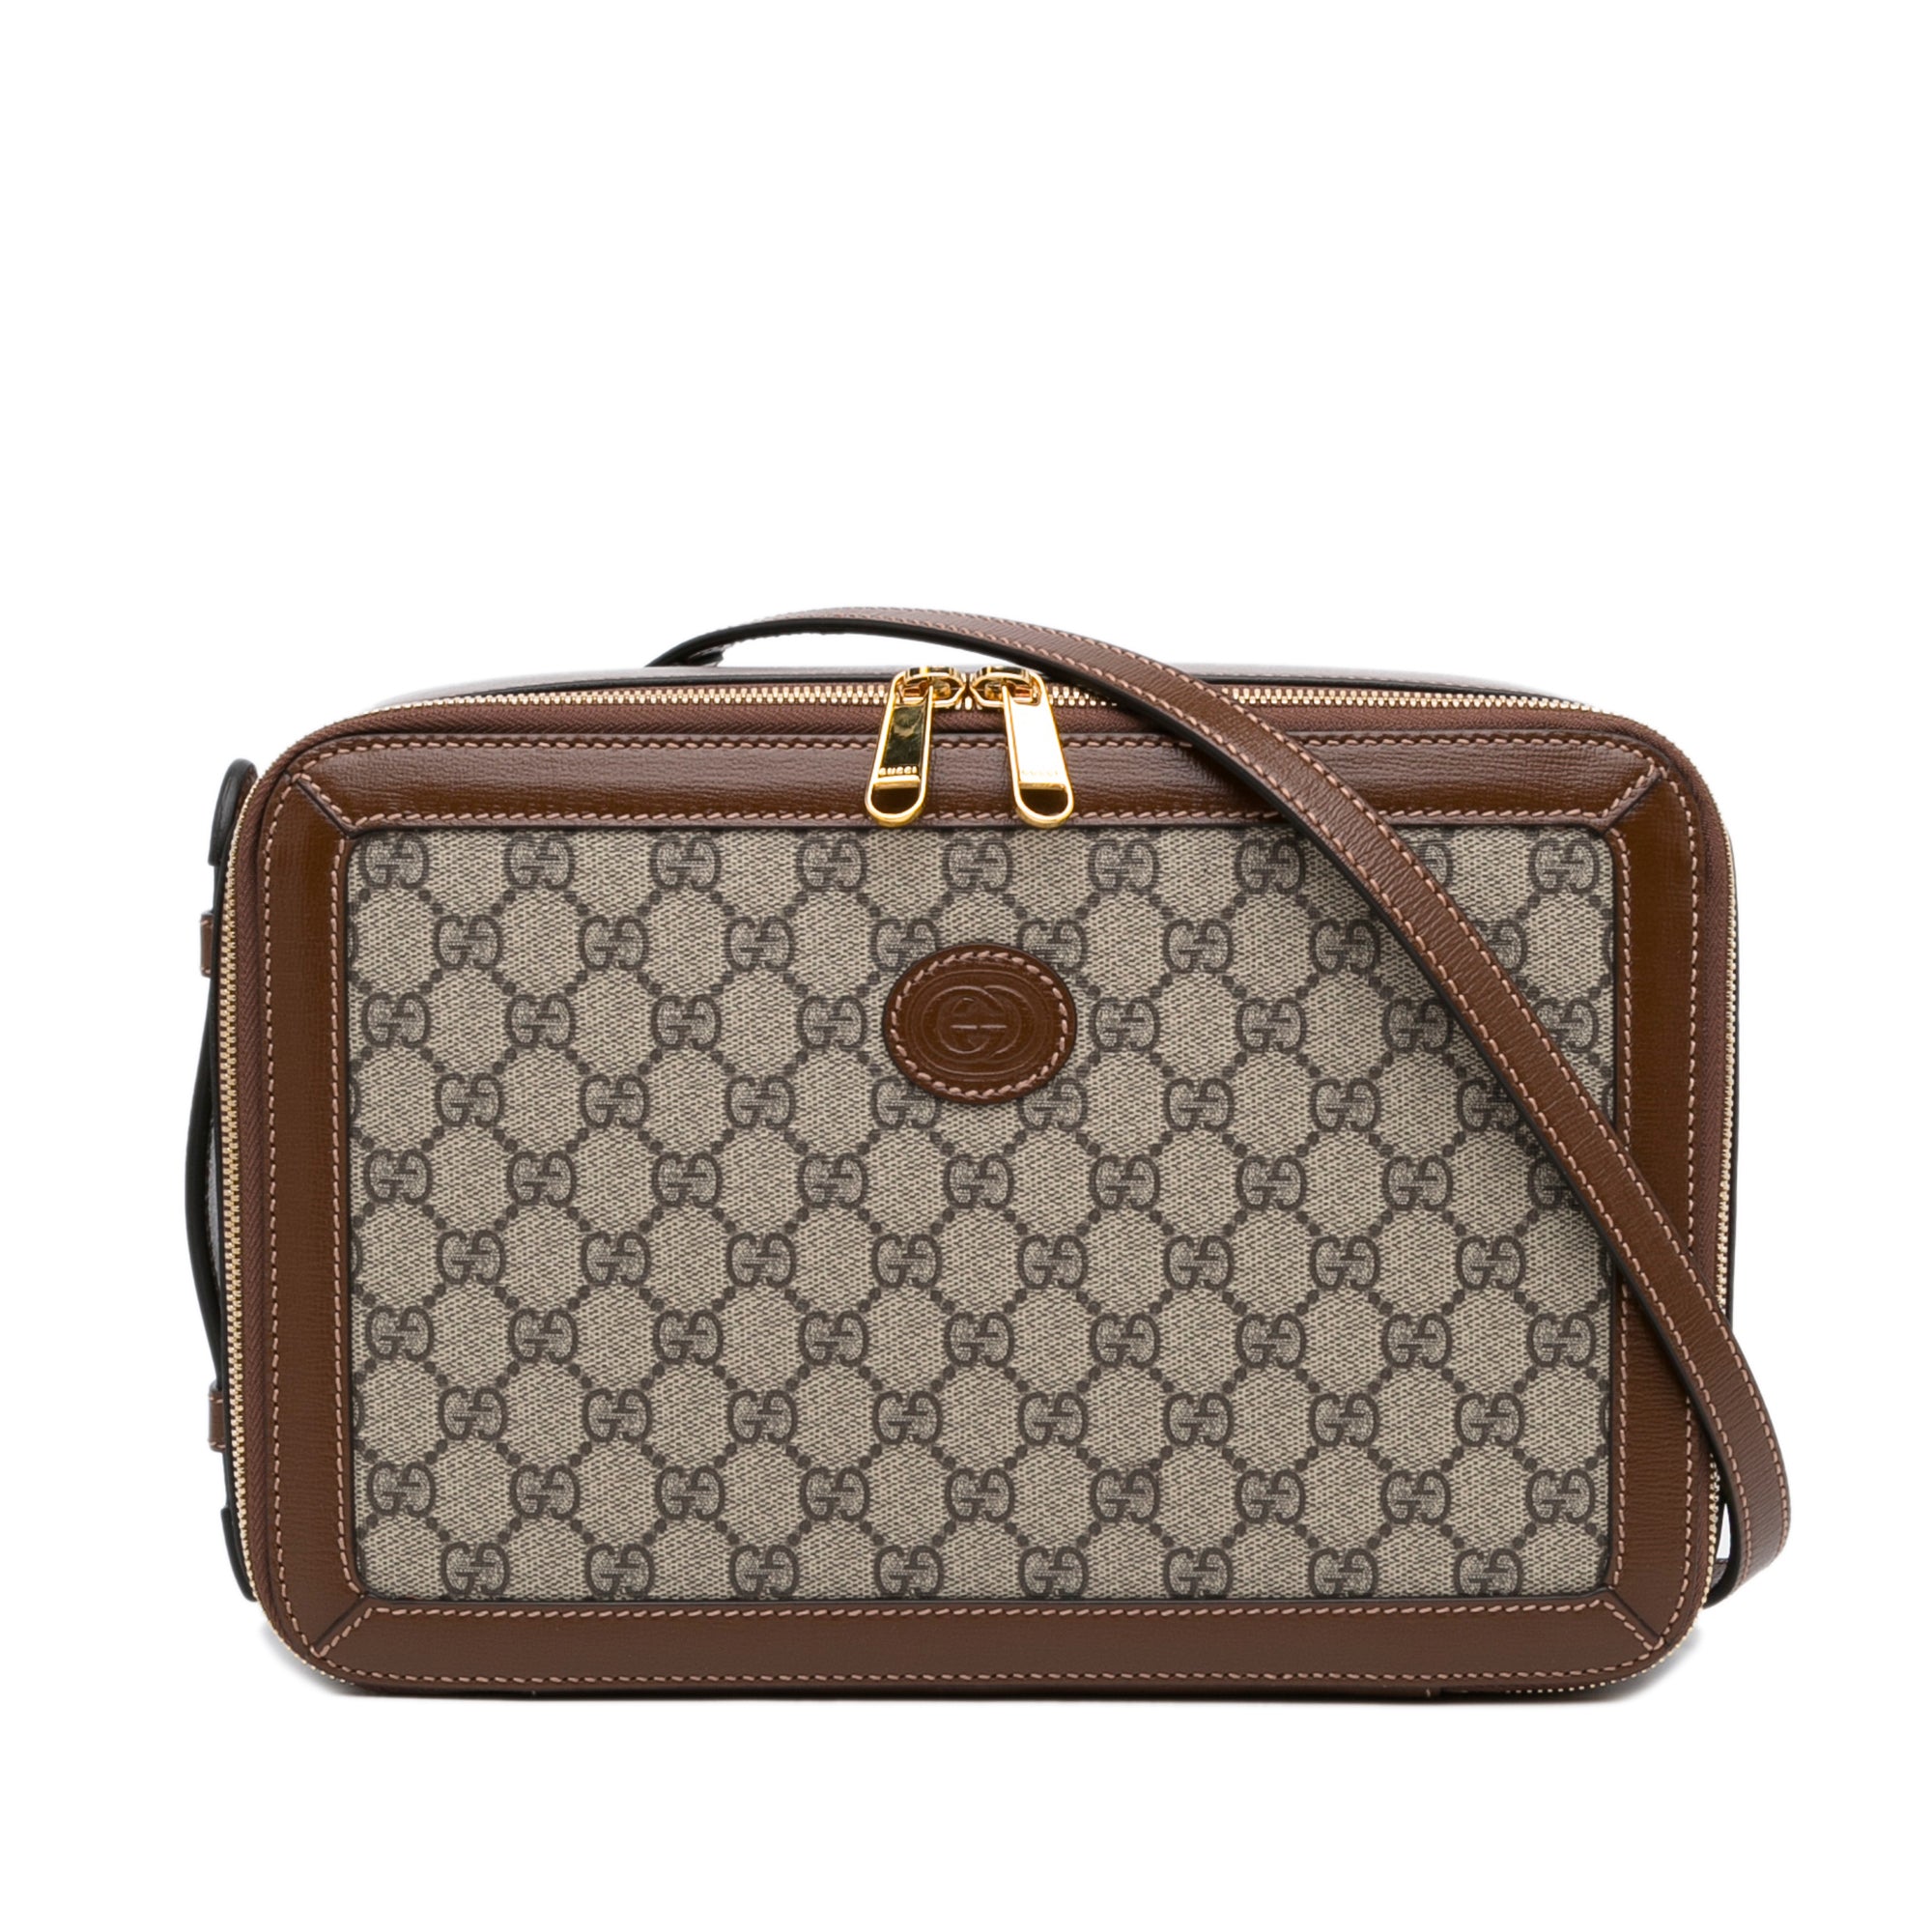 GUCCI Ophidia GG Supreme Coated Canvas Brown Leather Small